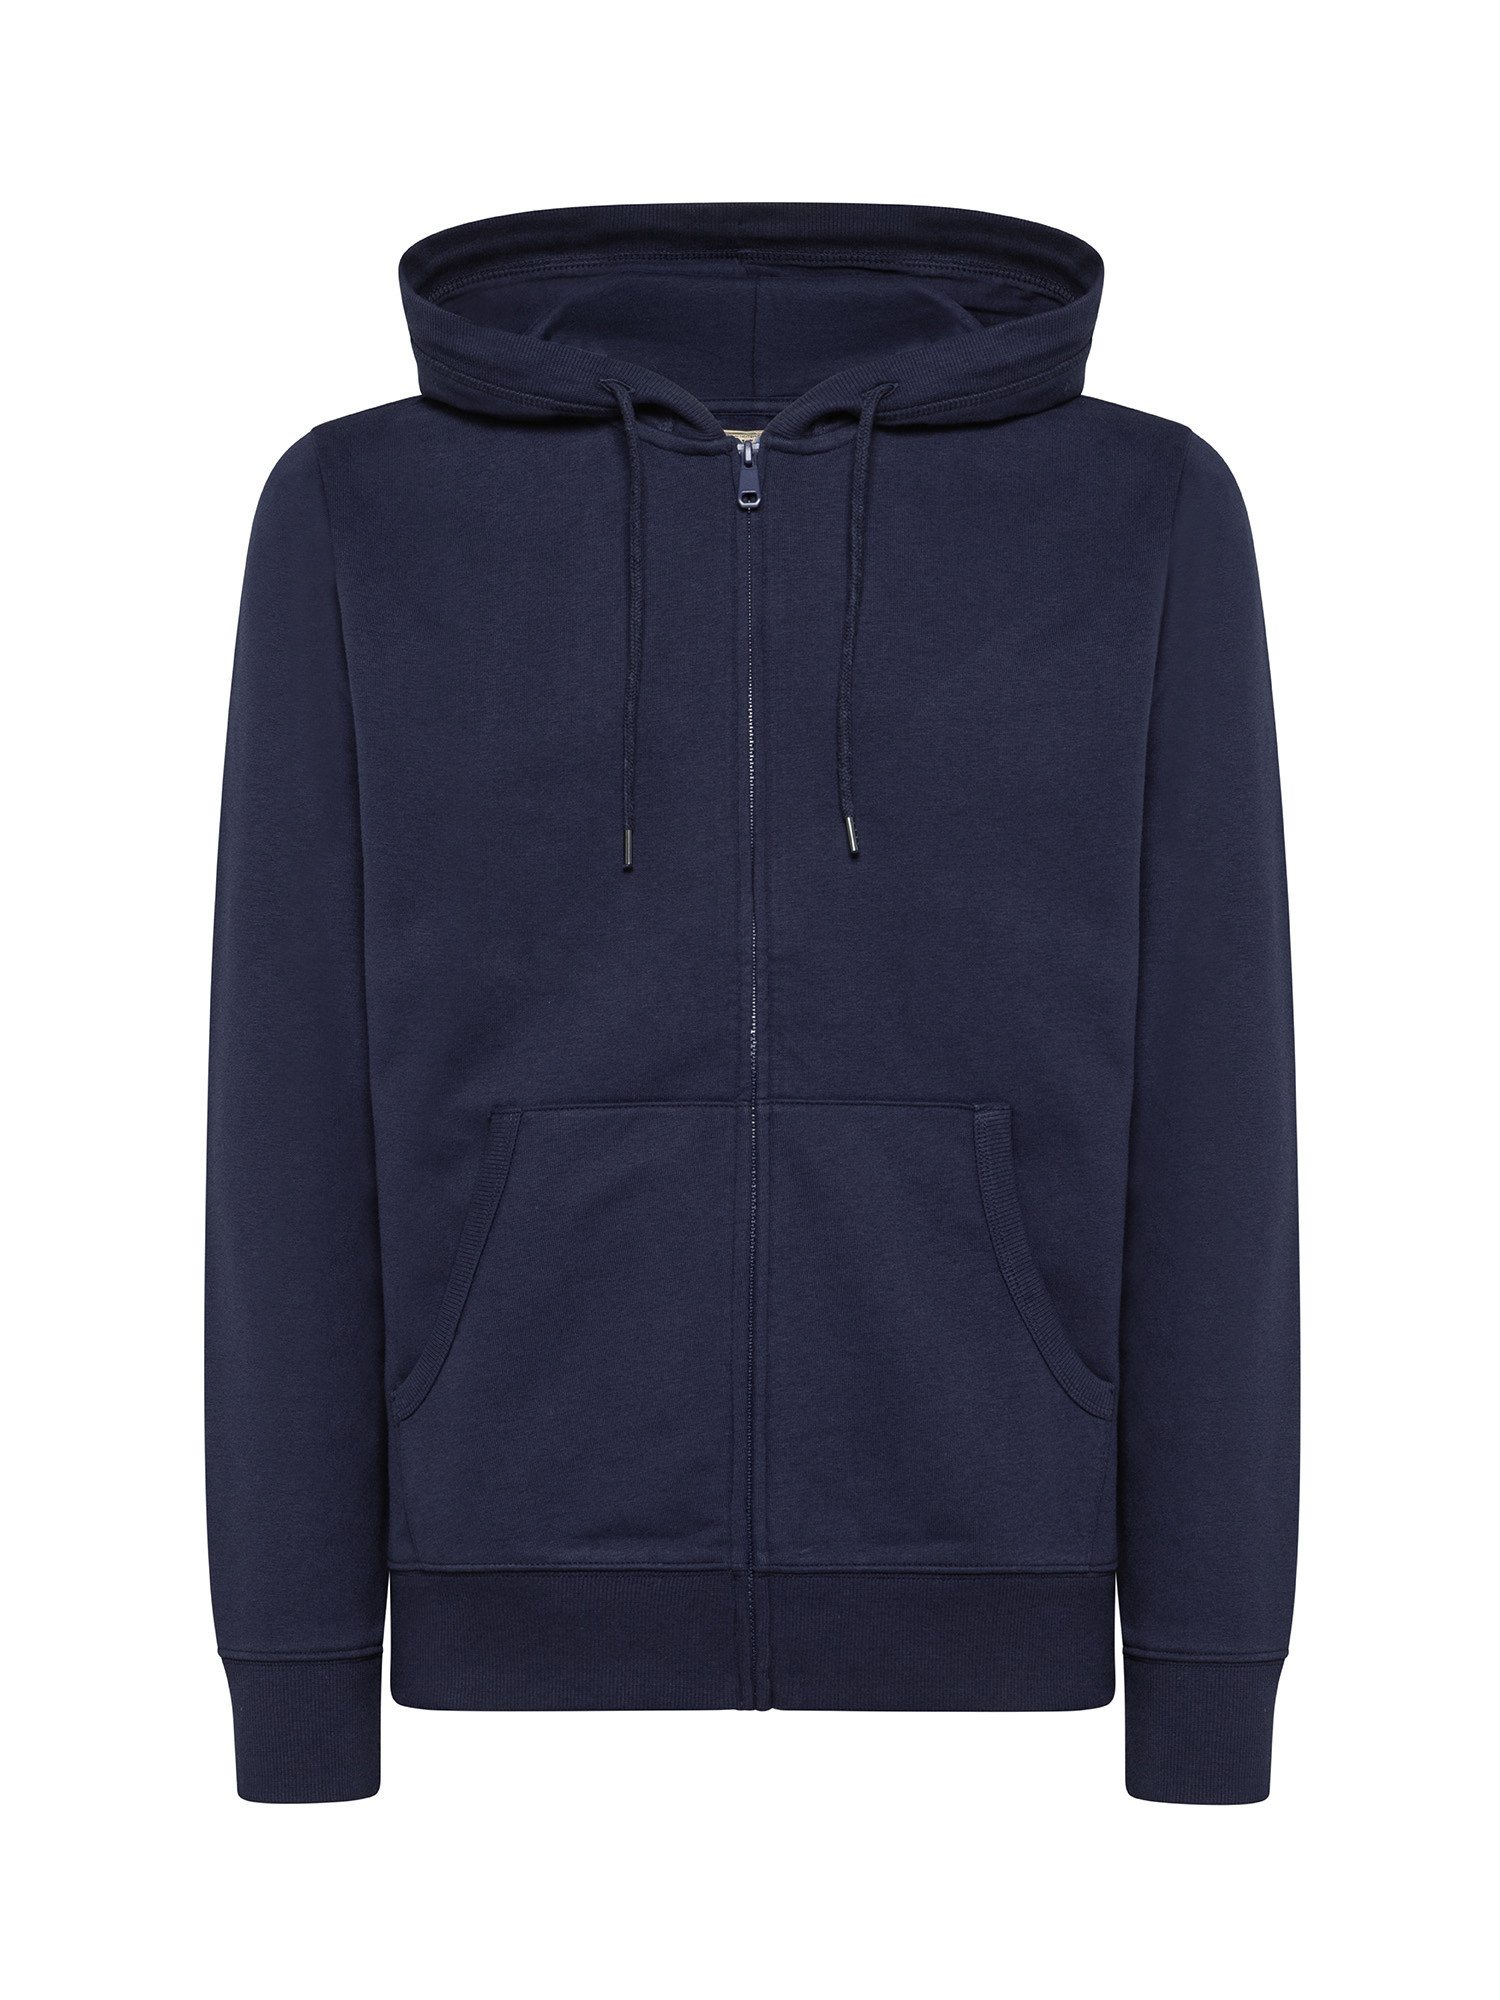 JCT - Soft touch full zip hoodie, Blue, large image number 0